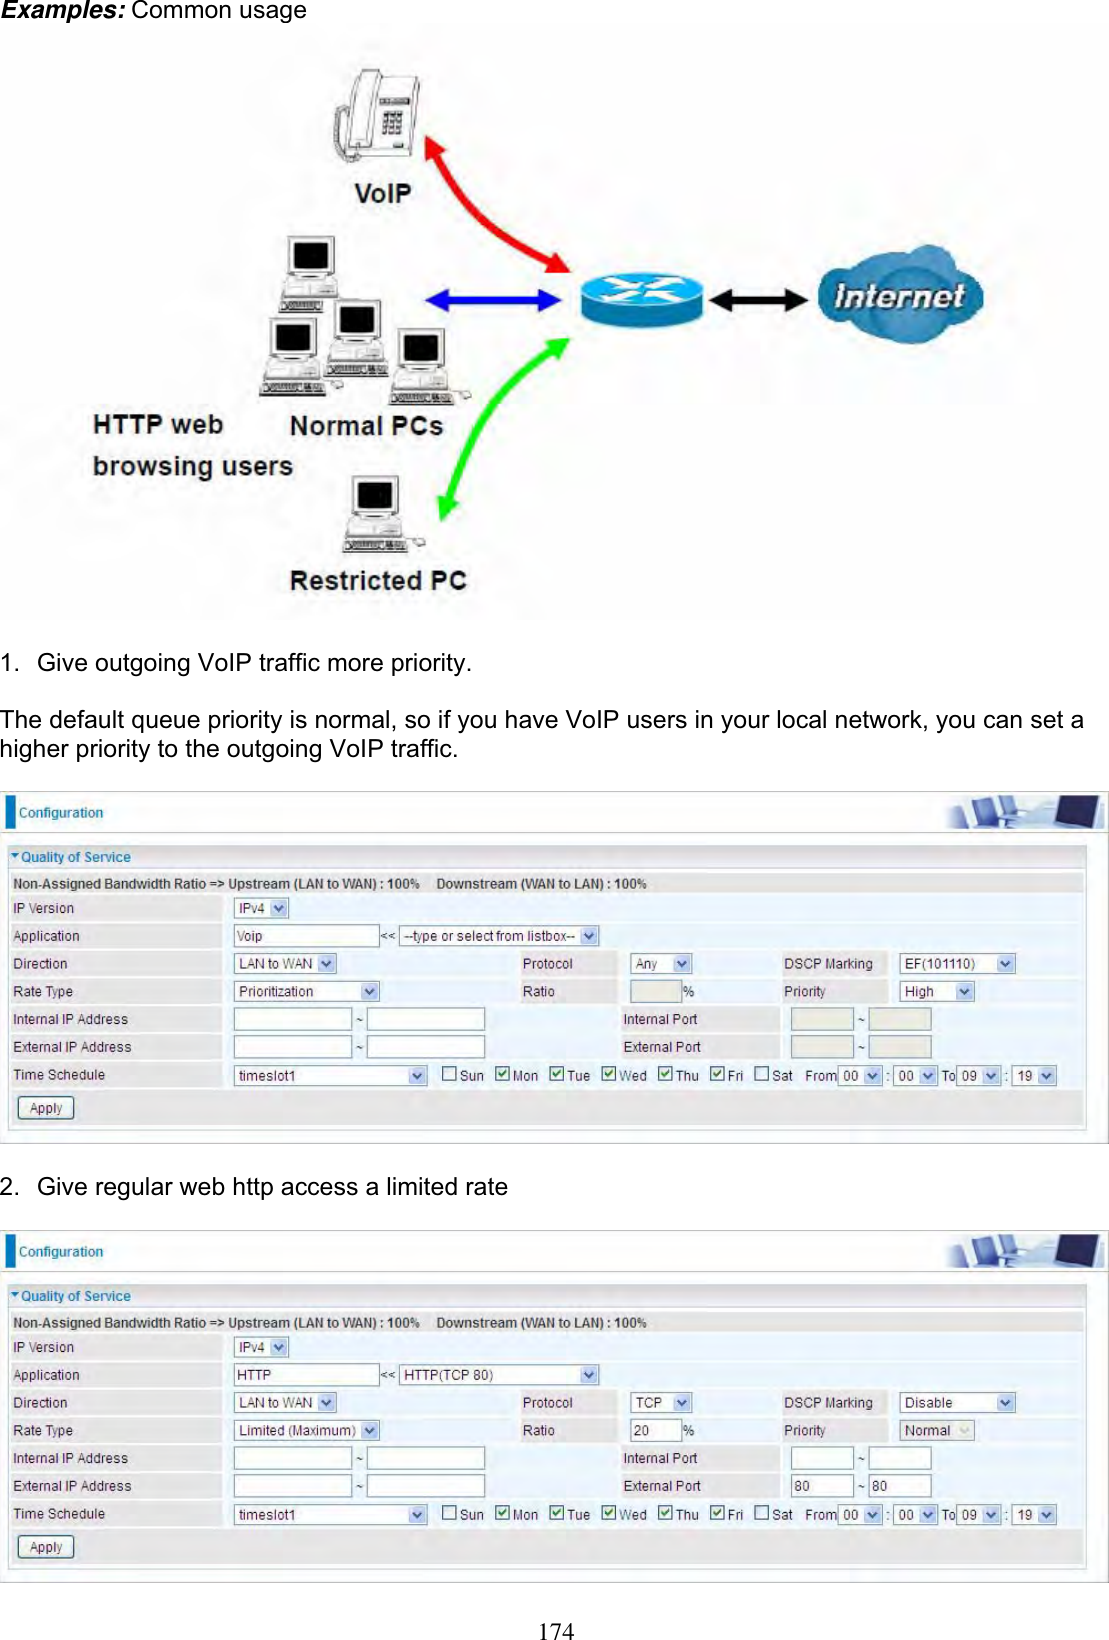 174Examples: Common usage1.  Give outgoing VoIP traffic more priority.  The default queue priority is normal, so if you have VoIP users in your local network, you can set a higher priority to the outgoing VoIP traffic. 2.  Give regular web http access a limited rate 